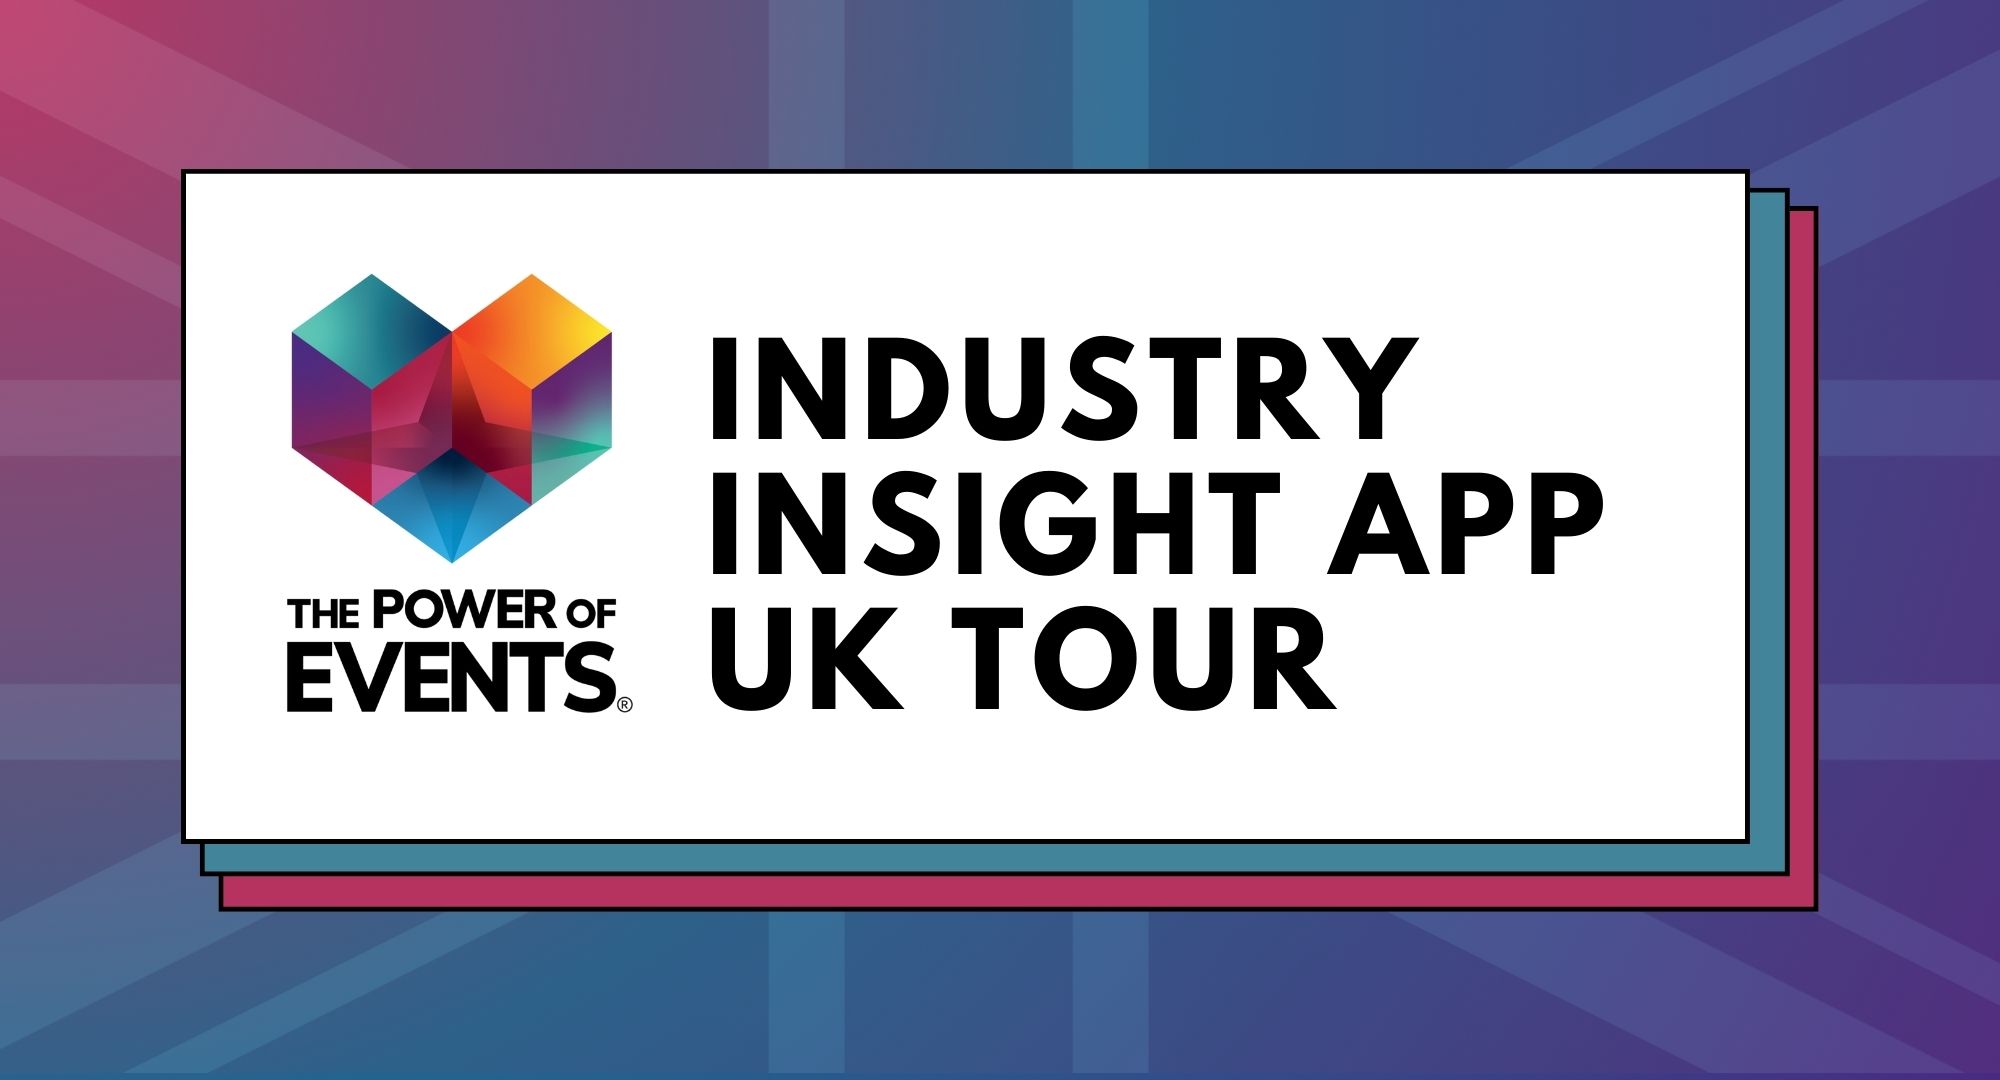 The Power of Events Industry Insight App